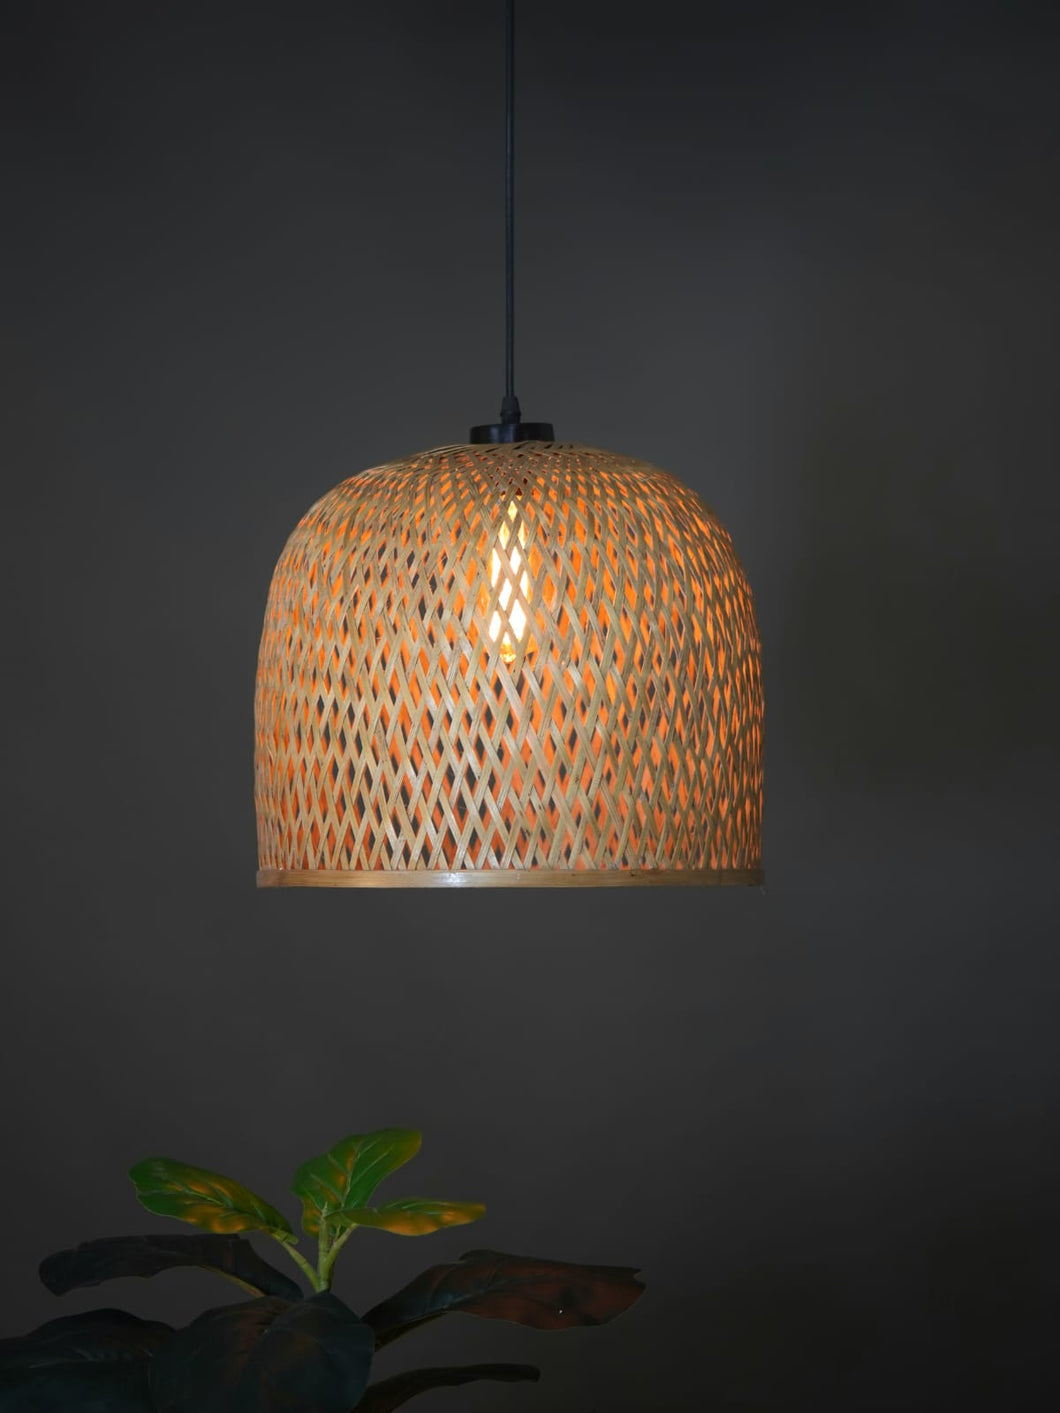 Classic Unique handmade Woven Hanging Pendant Light, Natural/Bamboo Pendant Light for Home restaurants and offices.(Size: 13